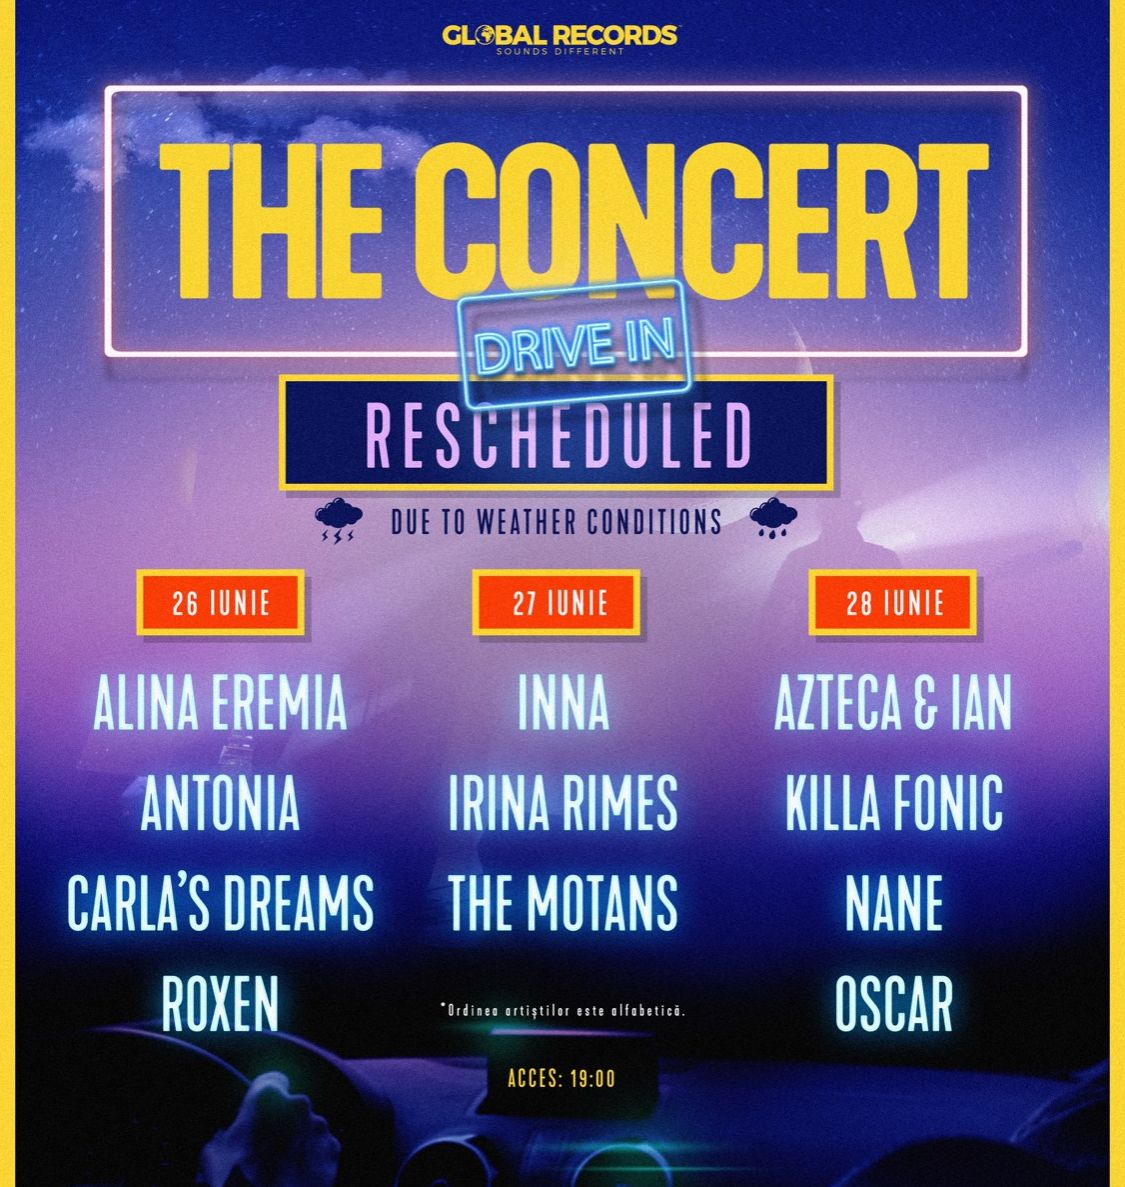 The Concert Drive In 2020 reprogramat